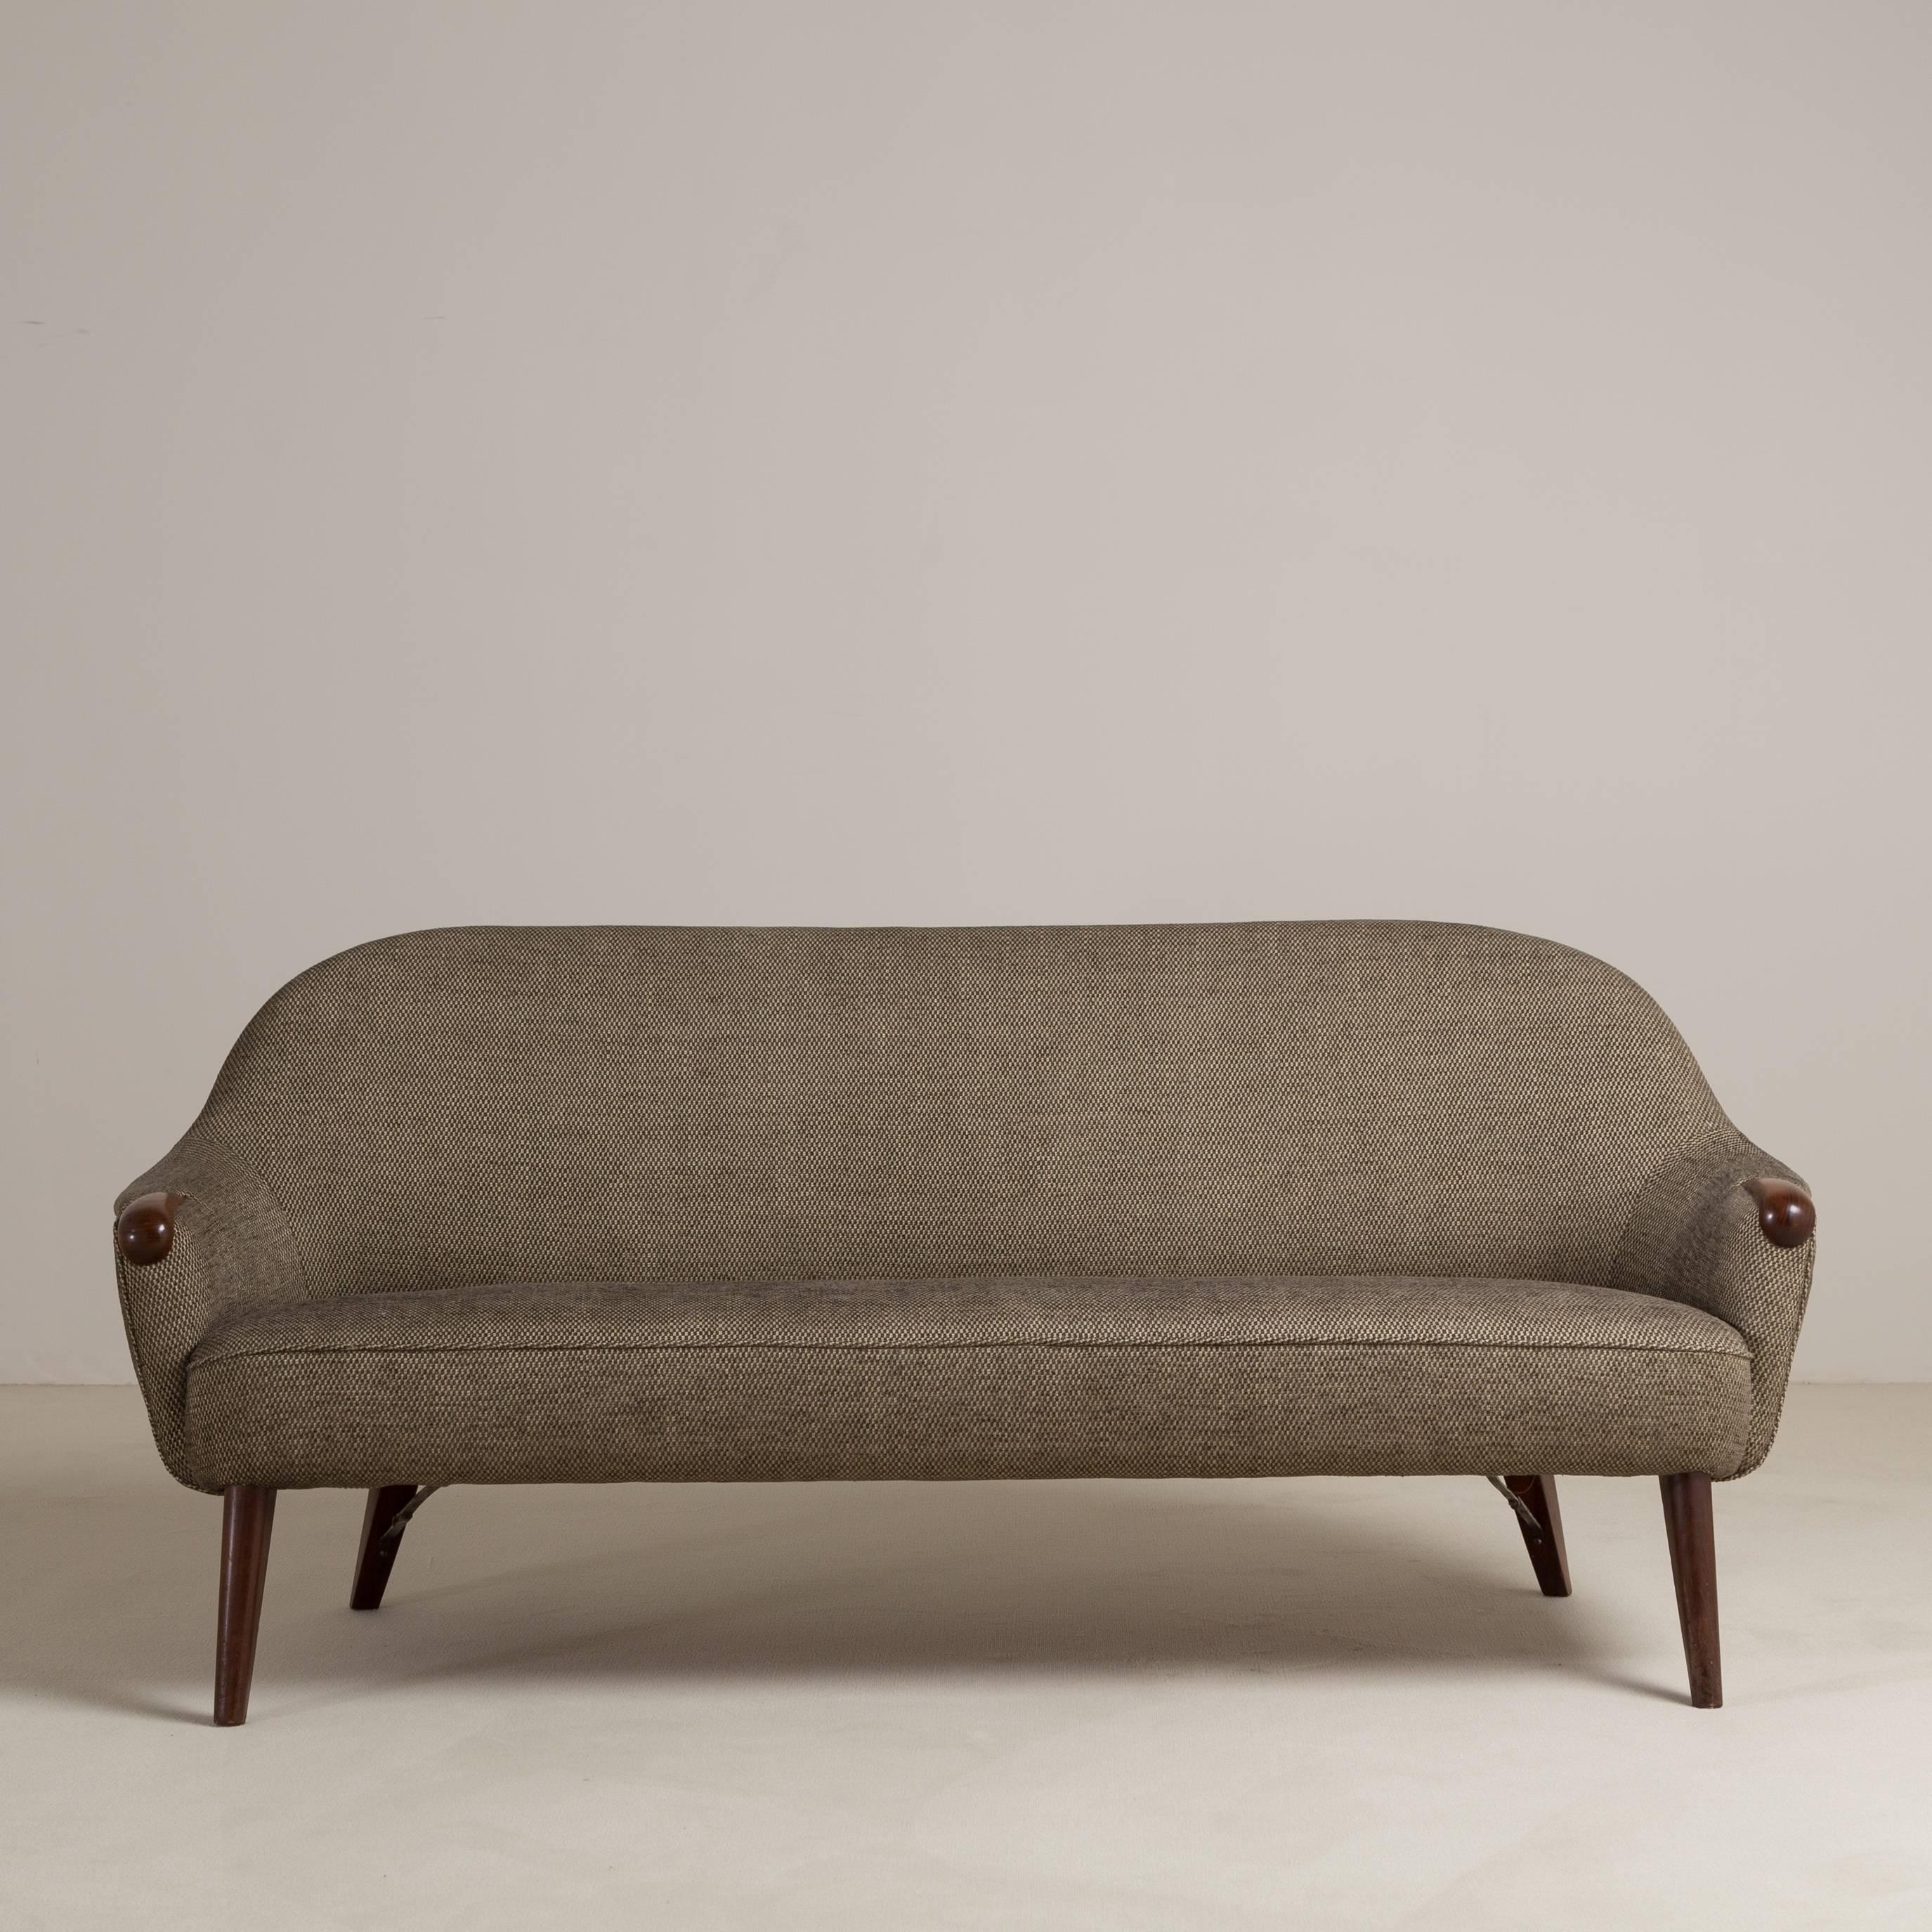 A chic Danish upholstered sofa by Kurt Ostervig, 1960s. Fully reupholstered by Talisman. 

Prices include 20% VAT which is removed for items shipped outside the EU.